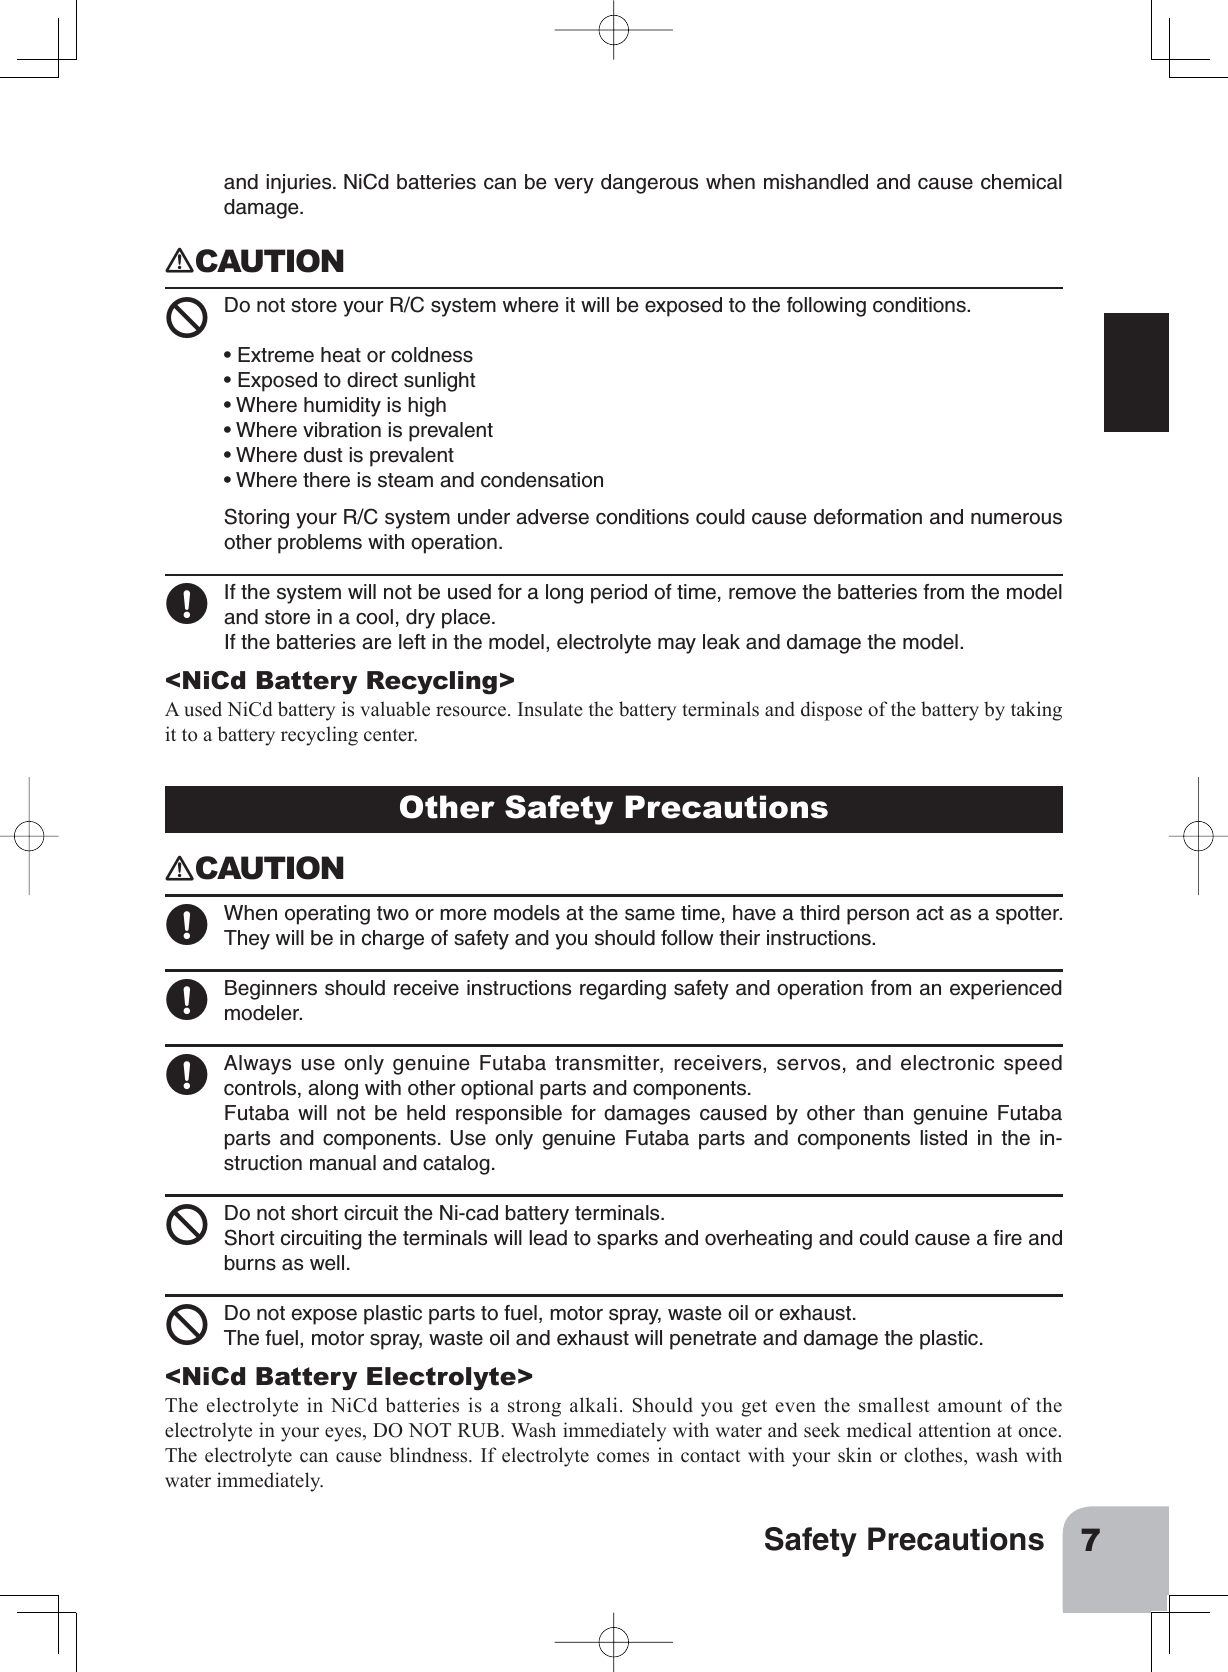 7Safety PrecautionsOther Safety Precautions󾙏CAUTION󾙋 When operating two or more models at the same time, have a third person act as a spotter.They will be in charge of safety and you should follow their instructions.󾙋 Beginners should receive instructions regarding safety and operation from an experiencedmodeler.󾙋 Always use only genuine Futaba transmitter, receivers, servos, and electronic speedcontrols, along with other optional parts and components.Futaba will not be held responsible for damages caused by other than genuine Futabaparts and components. Use only genuine Futaba parts and components listed in the in-struction manual and catalog.󾙍 Do not short circuit the Ni-cad battery terminals.Short circuiting the terminals will lead to sparks and overheating and could cause a ﬁre andburns as well.󾙍 Do not expose plastic parts to fuel, motor spray, waste oil or exhaust.The fuel, motor spray, waste oil and exhaust will penetrate and damage the plastic.&lt;NiCd Battery Electrolyte&gt;The electrolyte in NiCd batteries is a strong alkali. Should you get even the smallest amount of the electrolyte in your eyes, DO NOT RUB. Wash immediately with water and seek medical attention at once. The electrolyte can cause blindness. If electrolyte comes in contact with your skin or clothes, wash with water immediately.and injuries. NiCd batteries can be very dangerous when mishandled and cause chemicaldamage.󾙏CAUTION 󾙍 Do not store your R/C system where it will be exposed to the following conditions.• Extreme heat or coldness• Exposed to direct sunlight• Where humidity is high• Where vibration is prevalent• Where dust is prevalent• Where there is steam and condensationStoring your R/C system under adverse conditions could cause deformation and numerousother problems with operation.󾙋 If the system will not be used for a long period of time, remove the batteries from the modeland store in a cool, dry place.If the batteries are left in the model, electrolyte may leak and damage the model.&lt;NiCd Battery Recycling&gt;A used NiCd battery is valuable resource. Insulate the battery terminals and dispose of the battery by taking it to a battery recycling center.